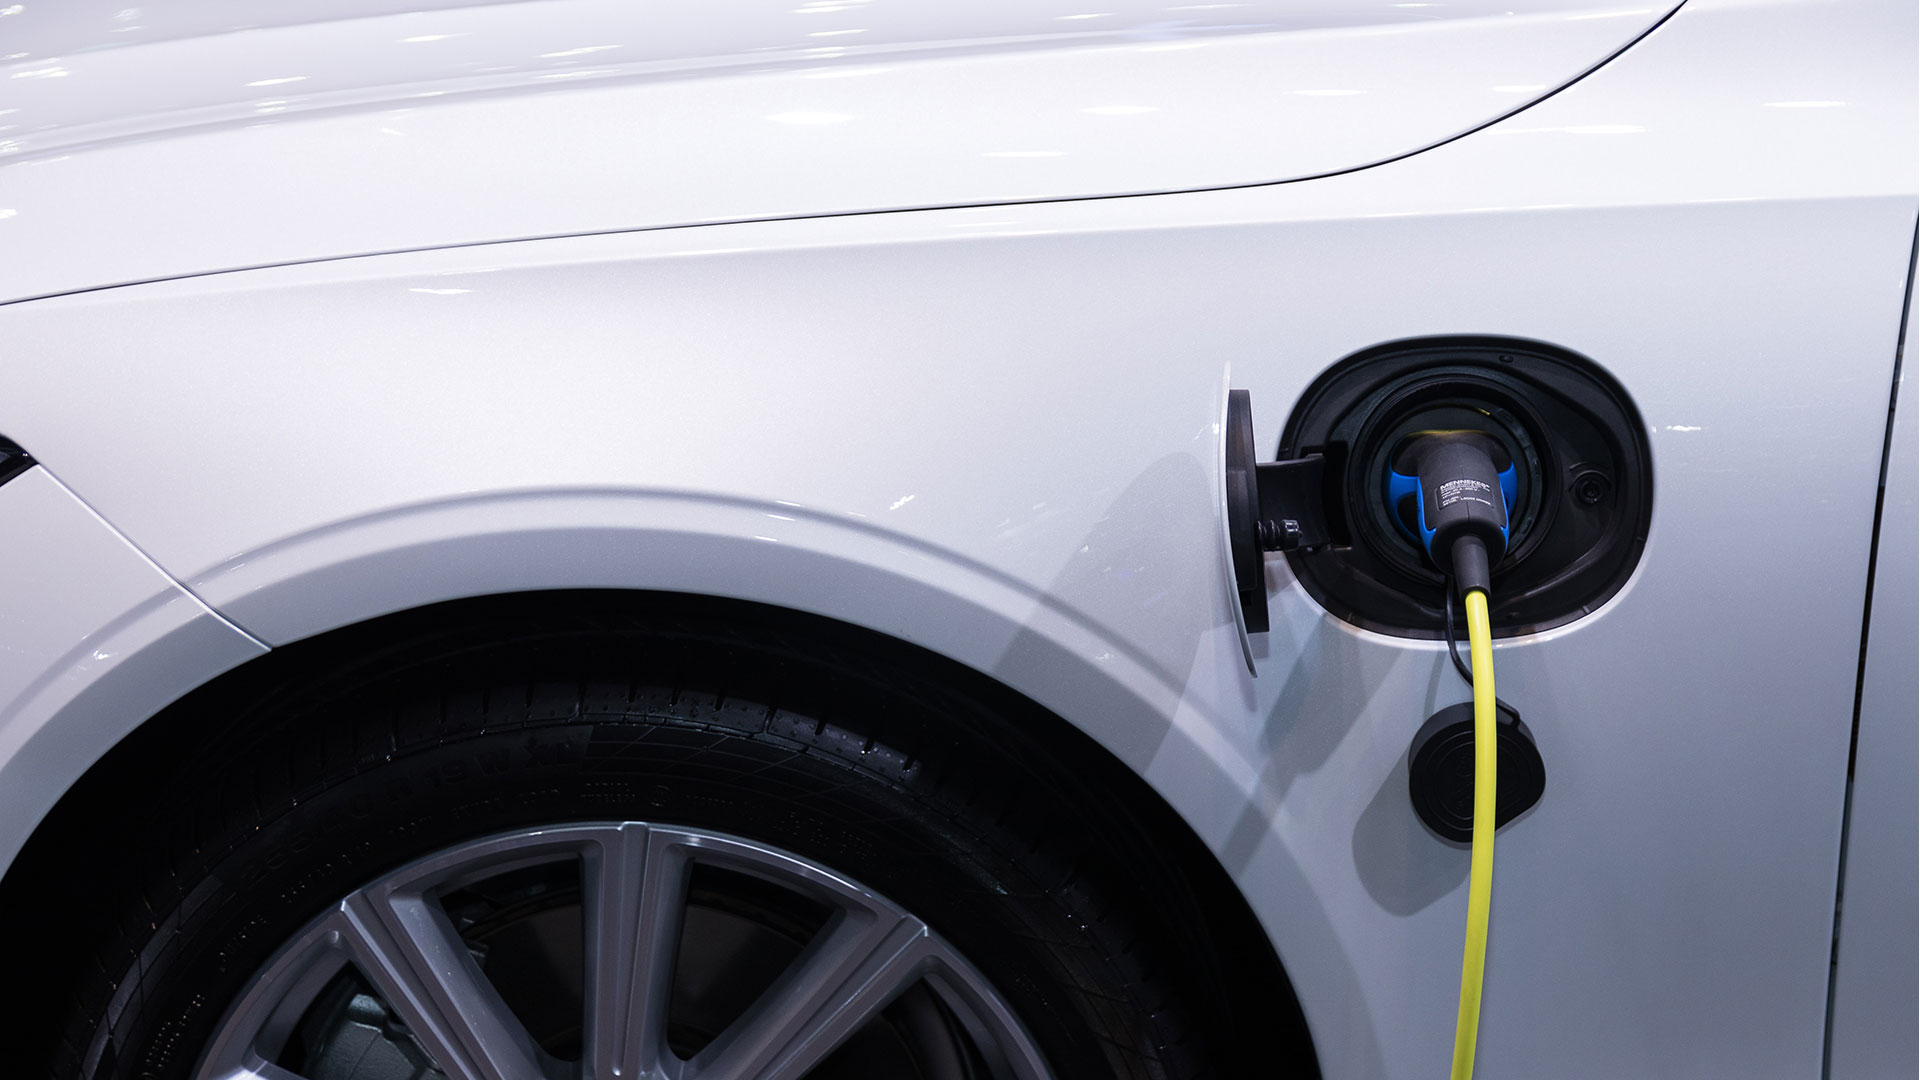 In the Media: ‘The Achilles heel for electric vehicles’: EVs, cold weather and a lack of information